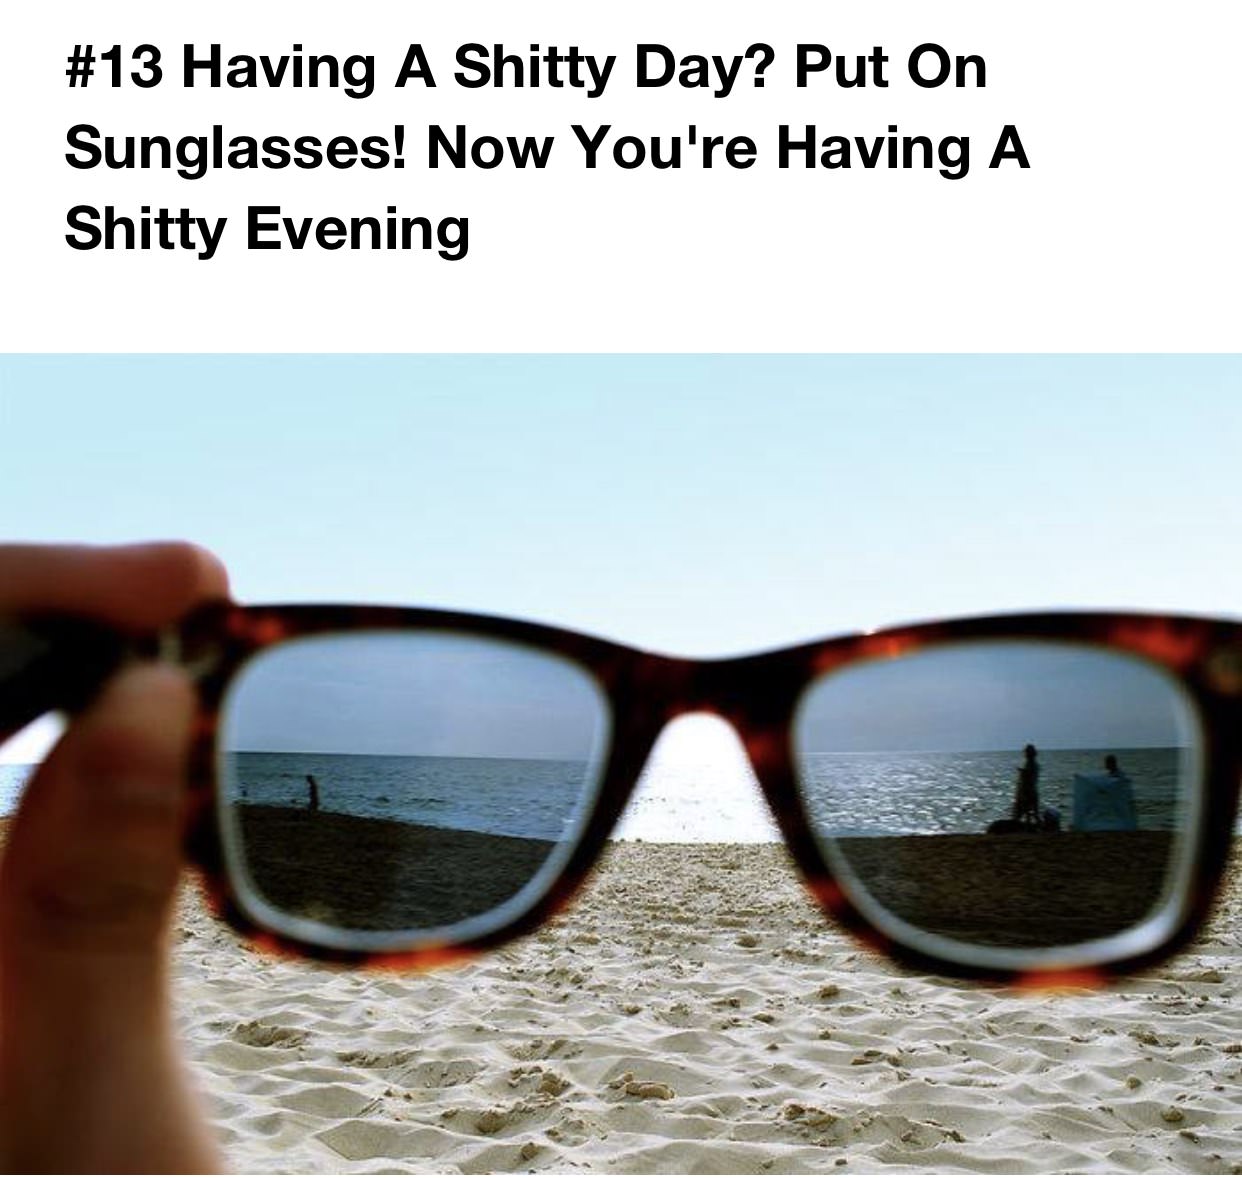 weird life hacks meme - Having A Shitty Day? Put On Sunglasses! Now You're Having A Shitty Evening